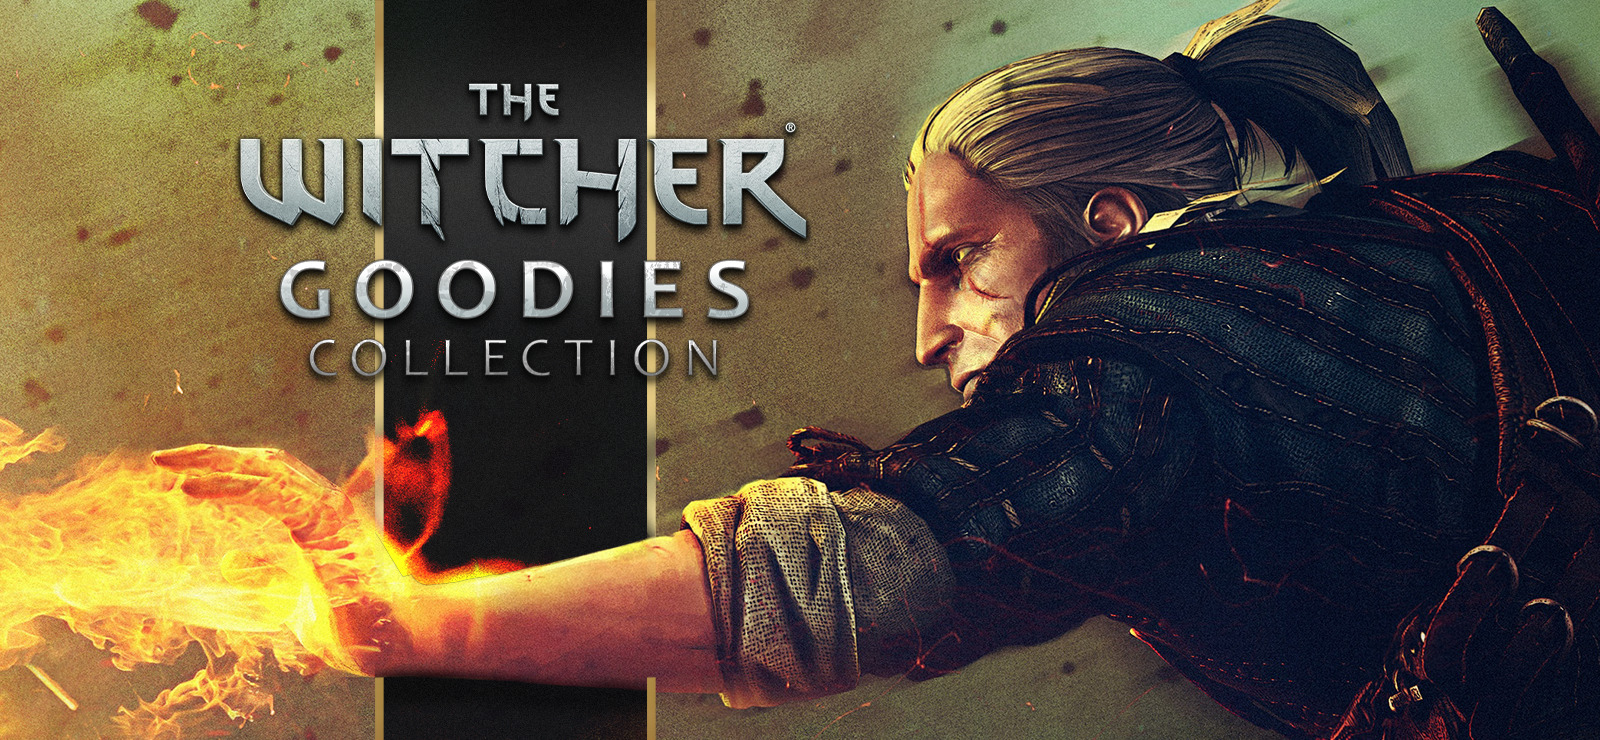 The Witcher - Goodies Collection GOG CD Key 2.54 USD